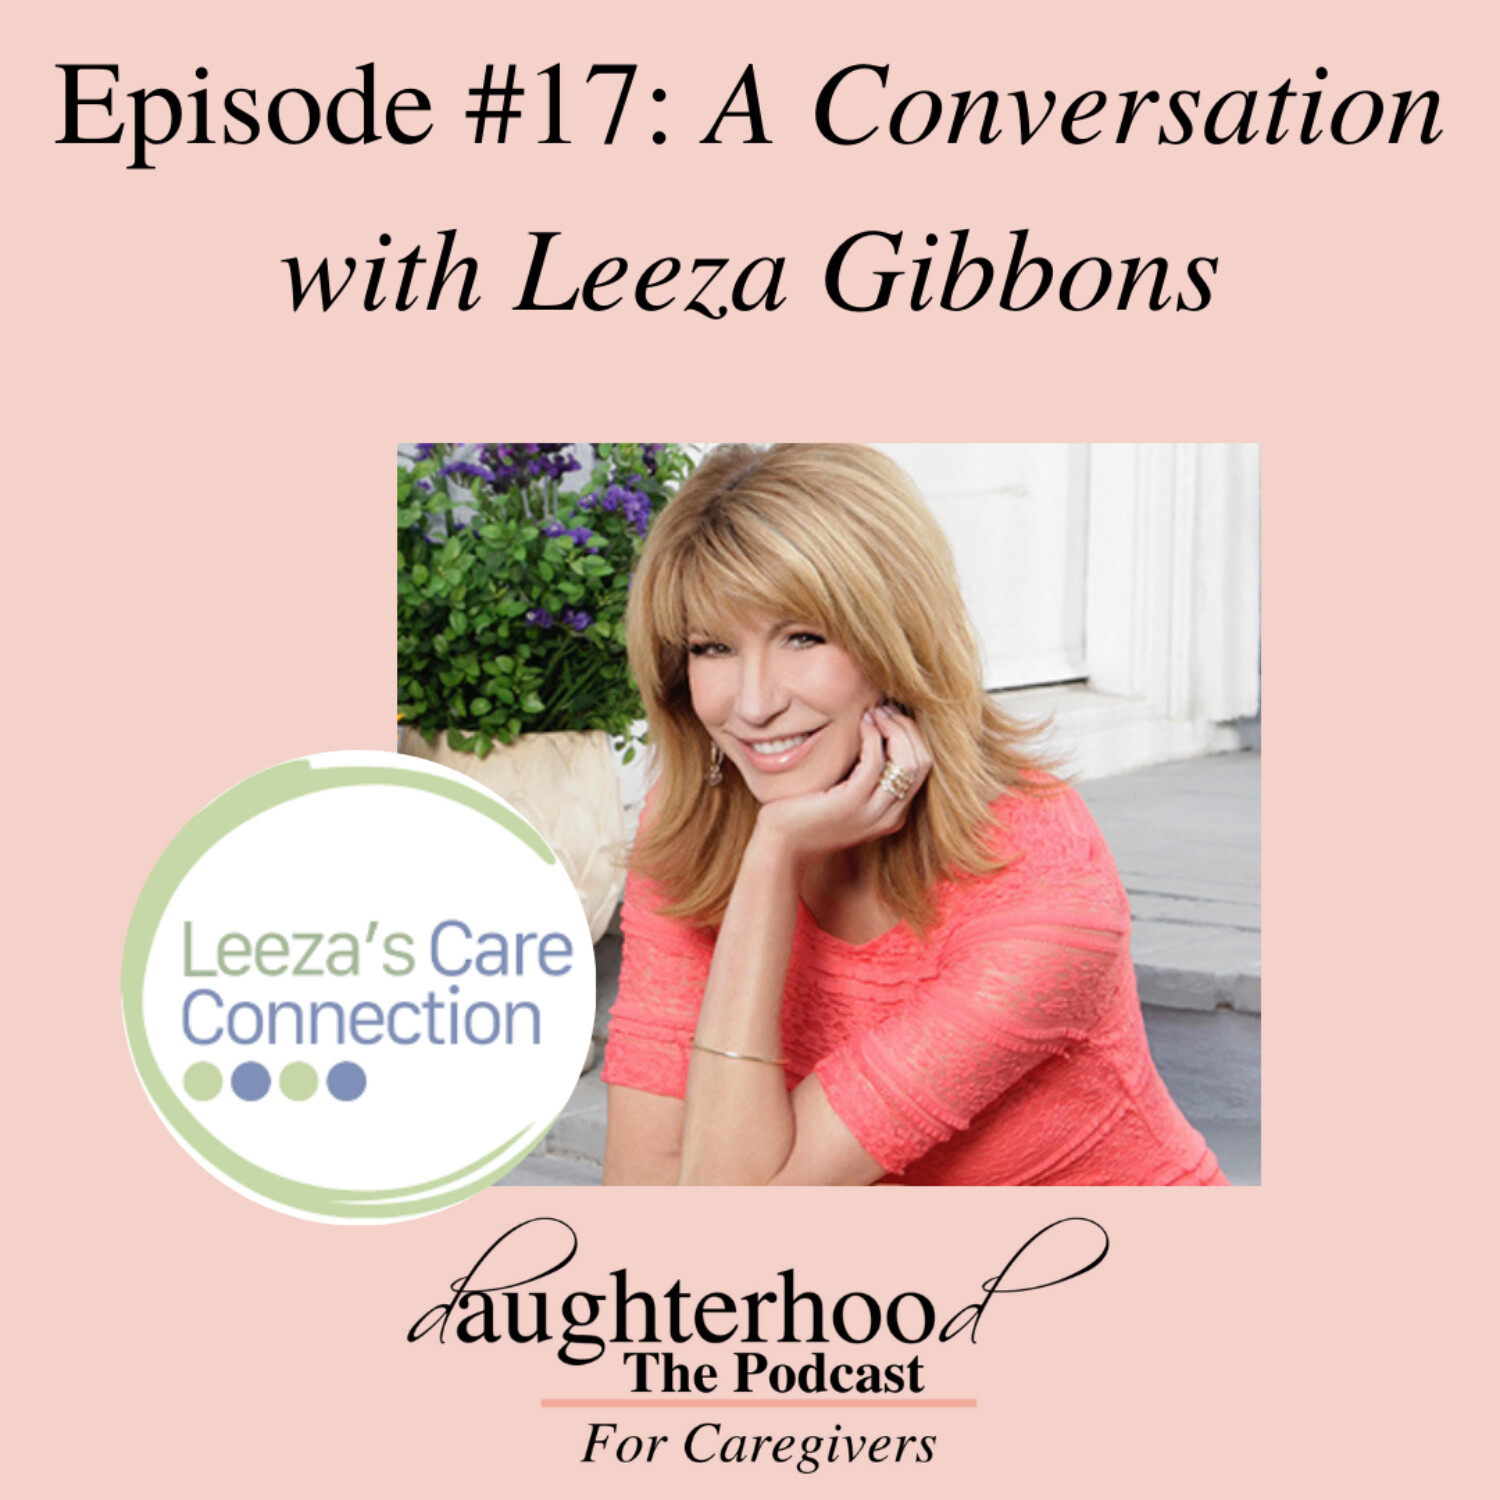 A Conversation with Leeza Gibbons